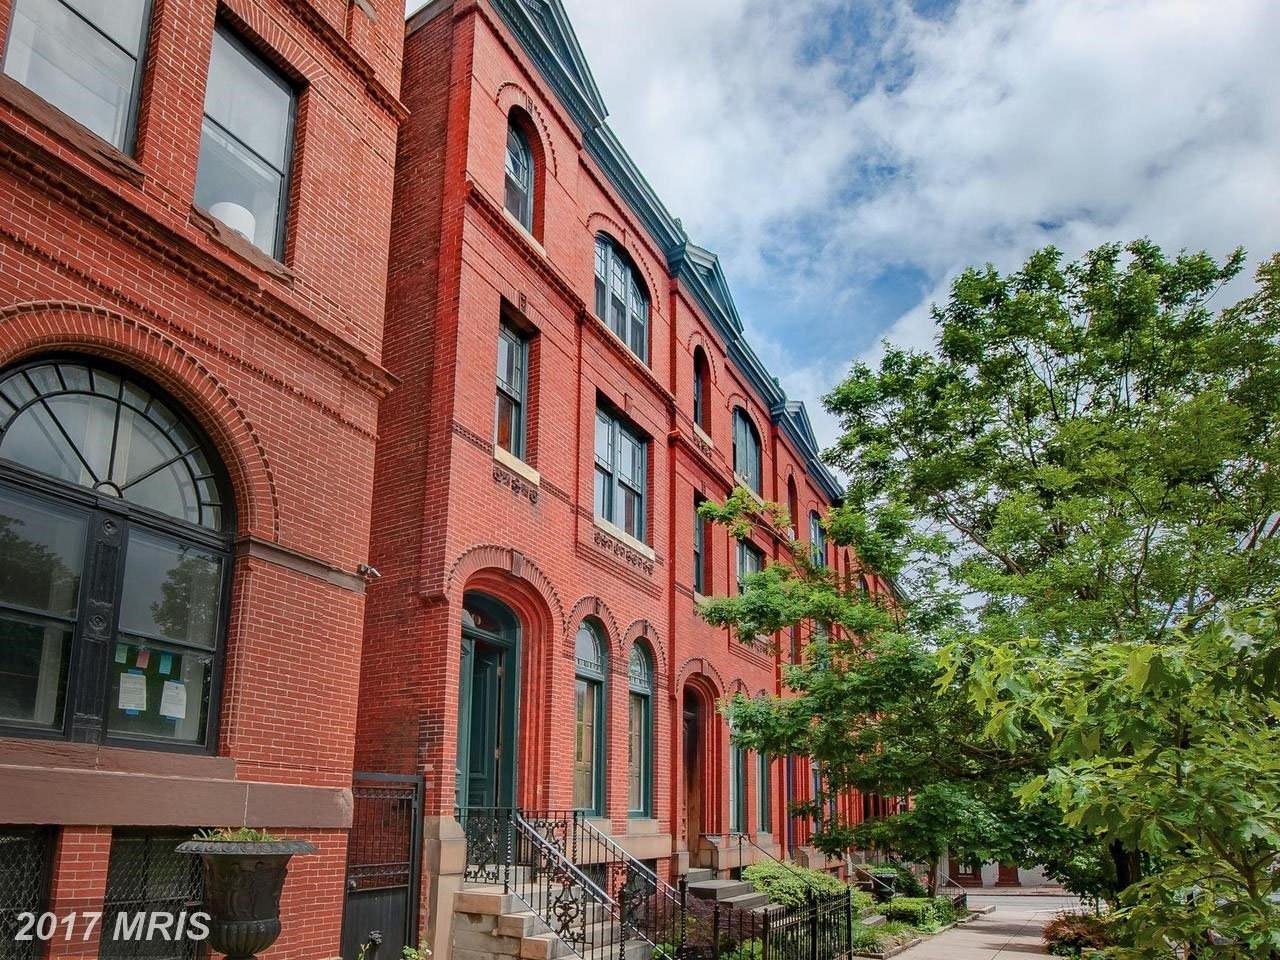 A late 19th-century Victorian brick row house in Baltimore whose exterior was seen in the TV series "House of Cards" as the abode of power-hungry D.C. power couple Frank and Claire Underwood is going up for auction.